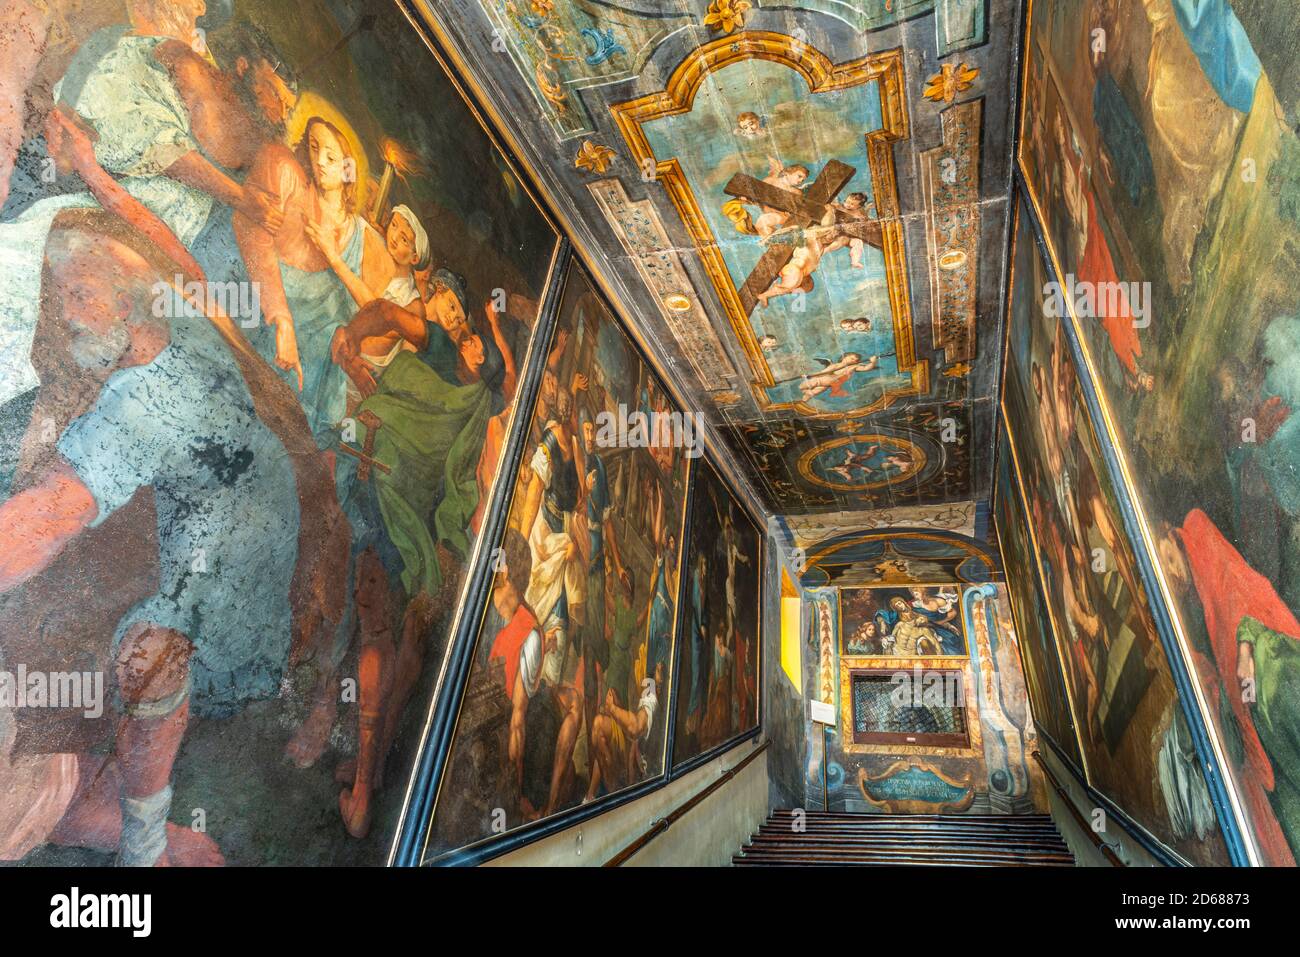 Frescoes decorating the holy staircase of Campli. Sanctuary of the Holy Stairs. Campli, Teramo province, Abruzzo, Italy, Europe Stock Photo